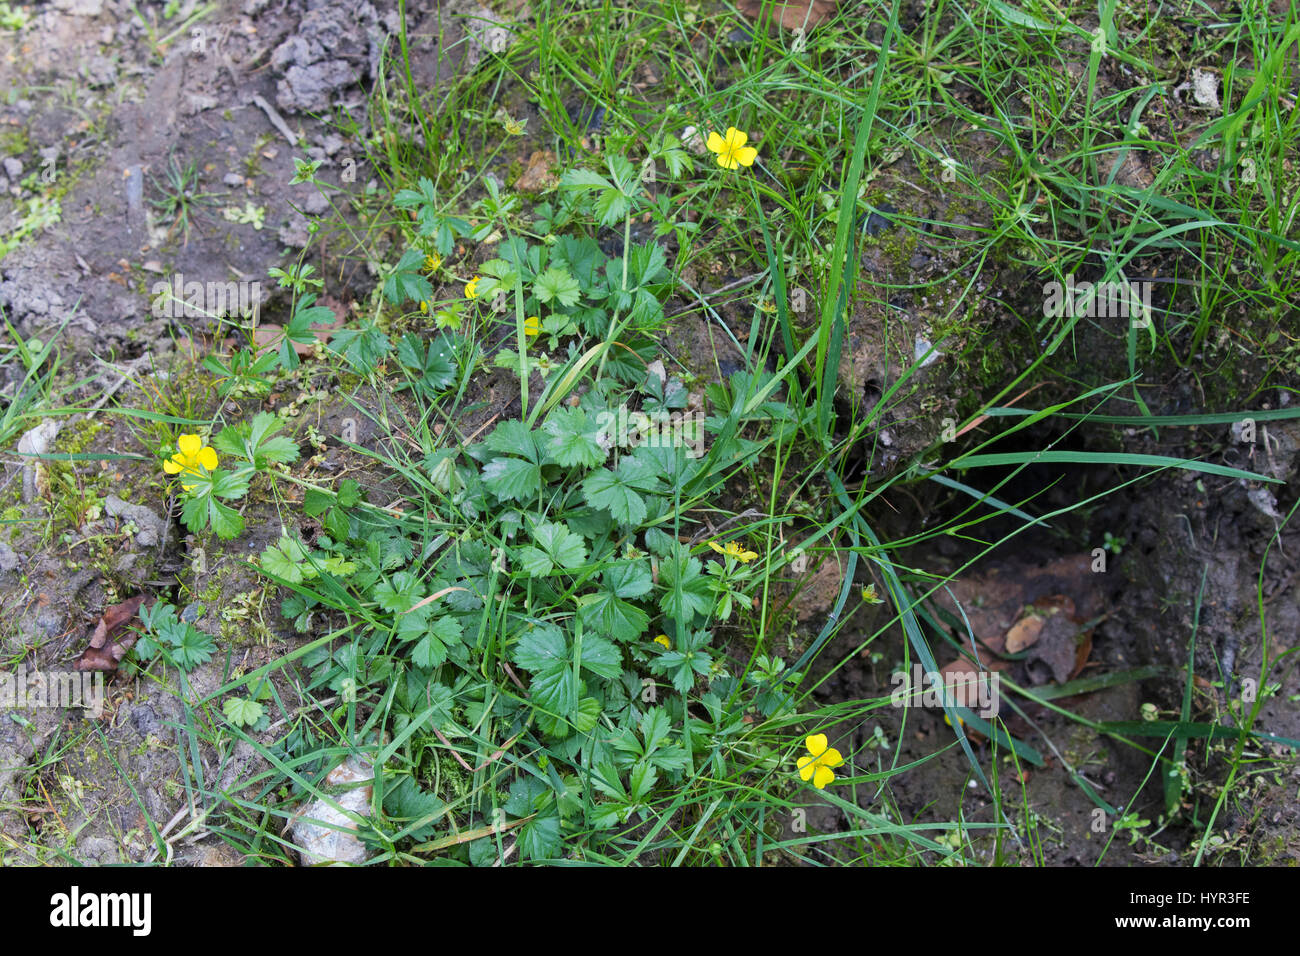 Tormentil Potentilla erecta growing in muddy track Hook Common Hampshire and Isle of Wight Wildlife Trust Reserve Hampshire England UK August 2016 Stock Photo